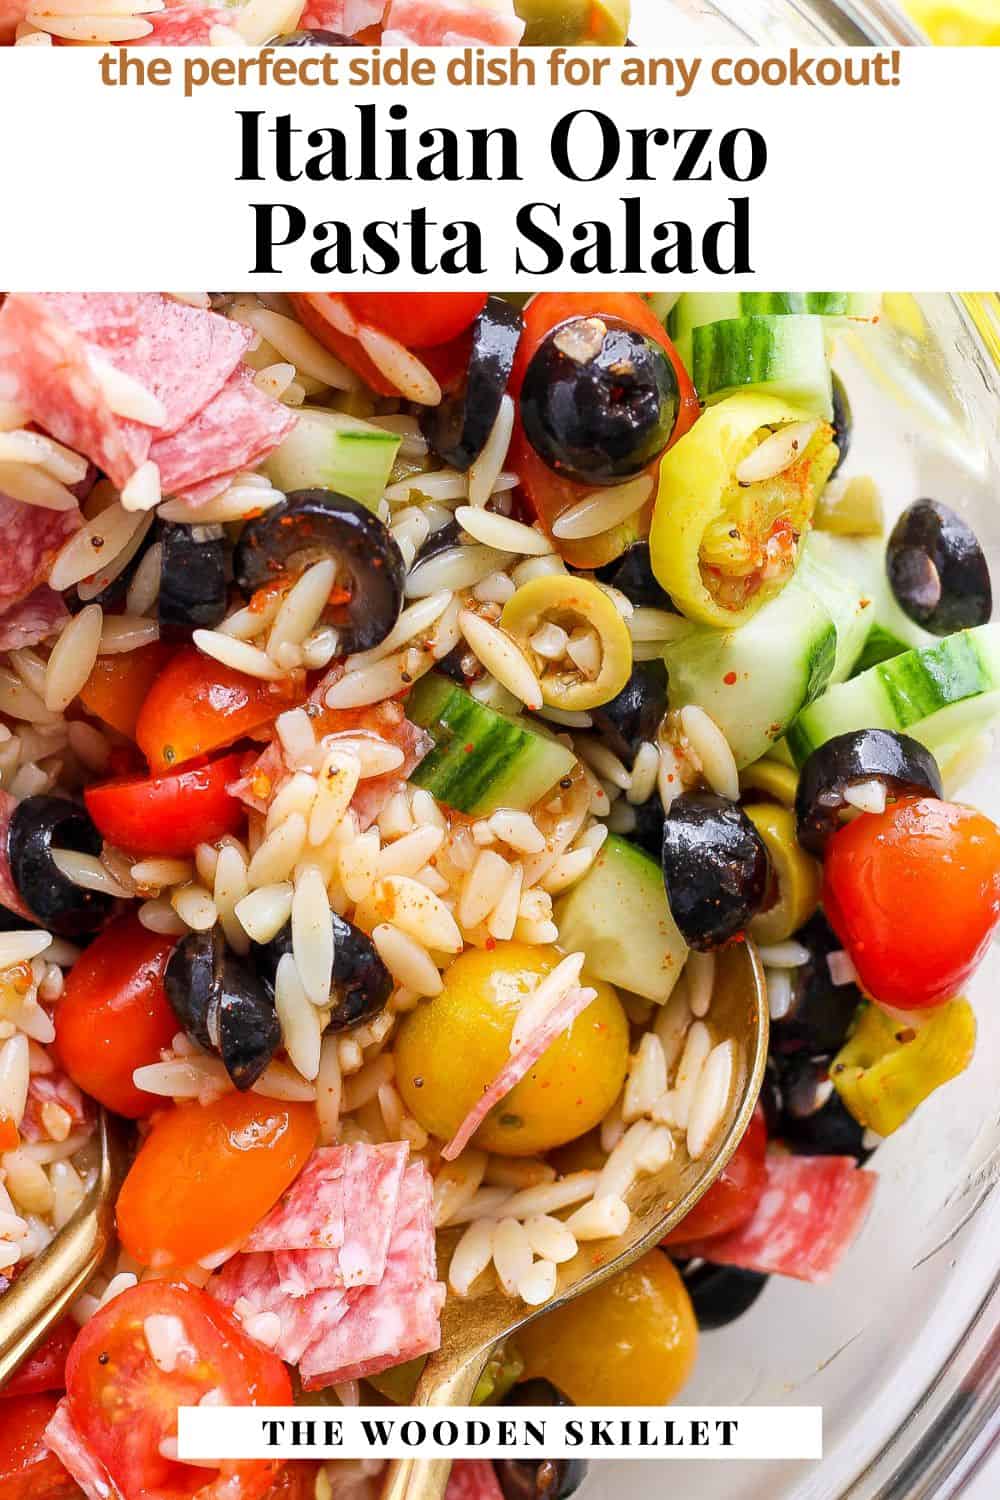 Pinterest image showing the orzo salad with the title, "italian orzo pasta salad. the perfect dish for any cookout!"